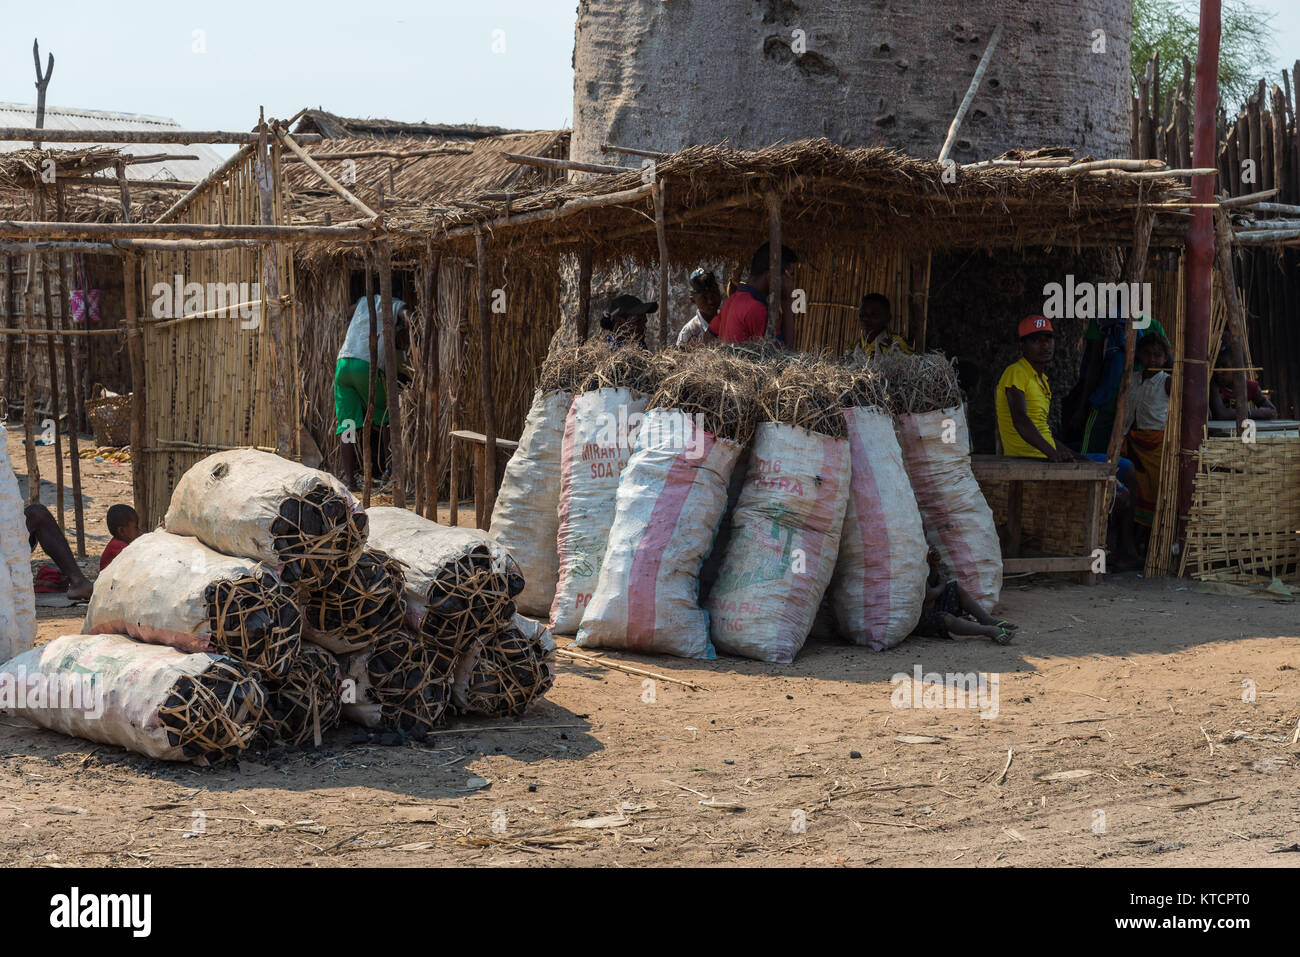 Sacks full of charcoal for sale. It's the main source of cooking fuel in rural Madagascar, Africa. Stock Photo